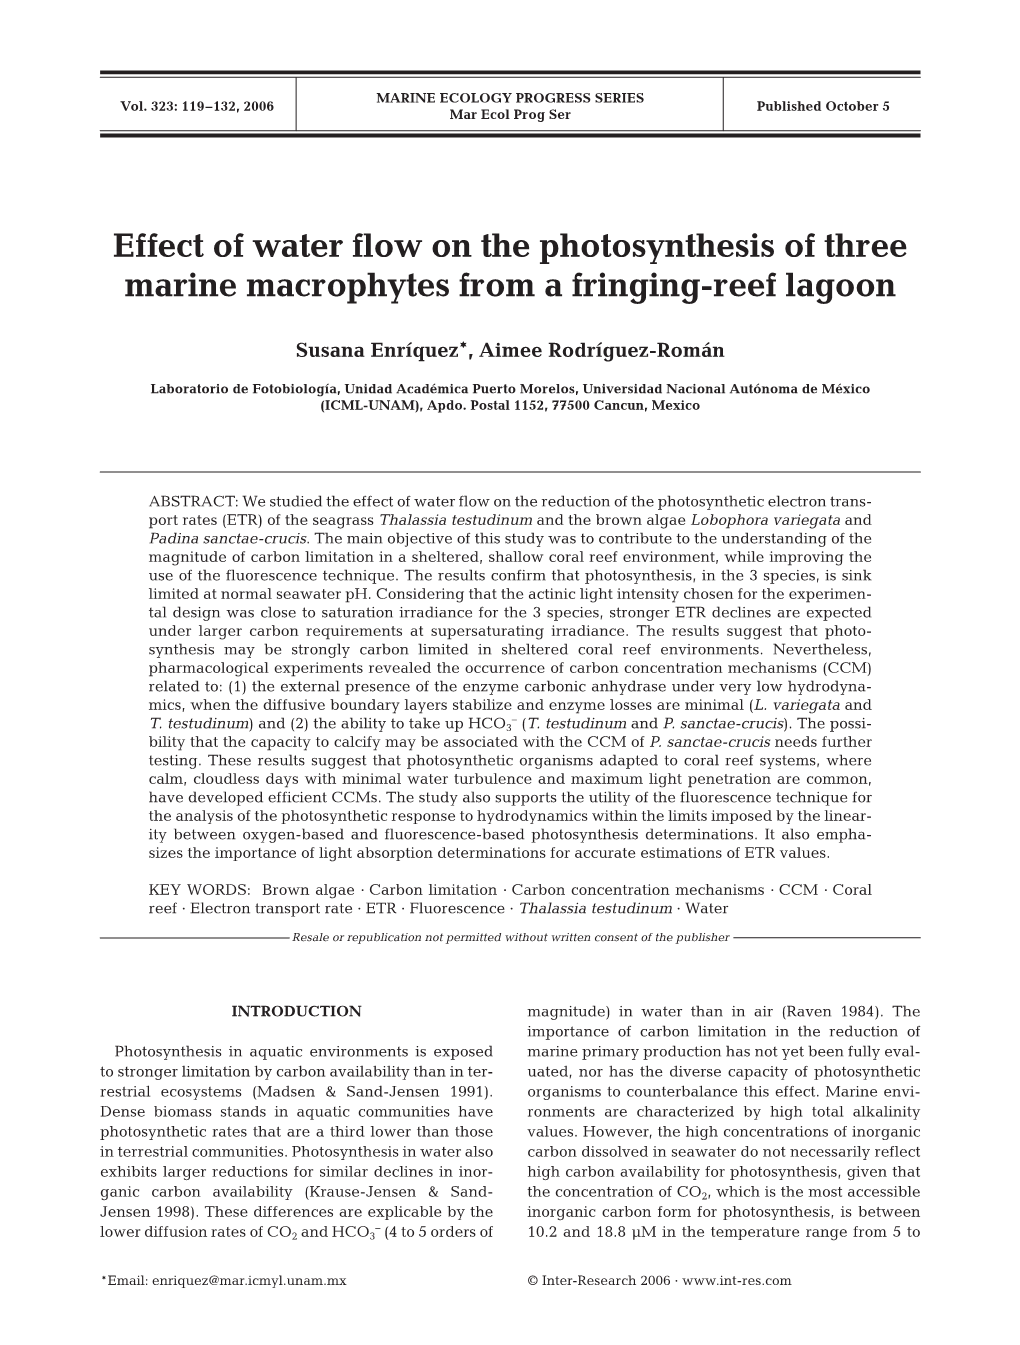 Effect of Water Flow on the Photosynthesis of Three Marine Macrophytes from a Fringing-Reef Lagoon